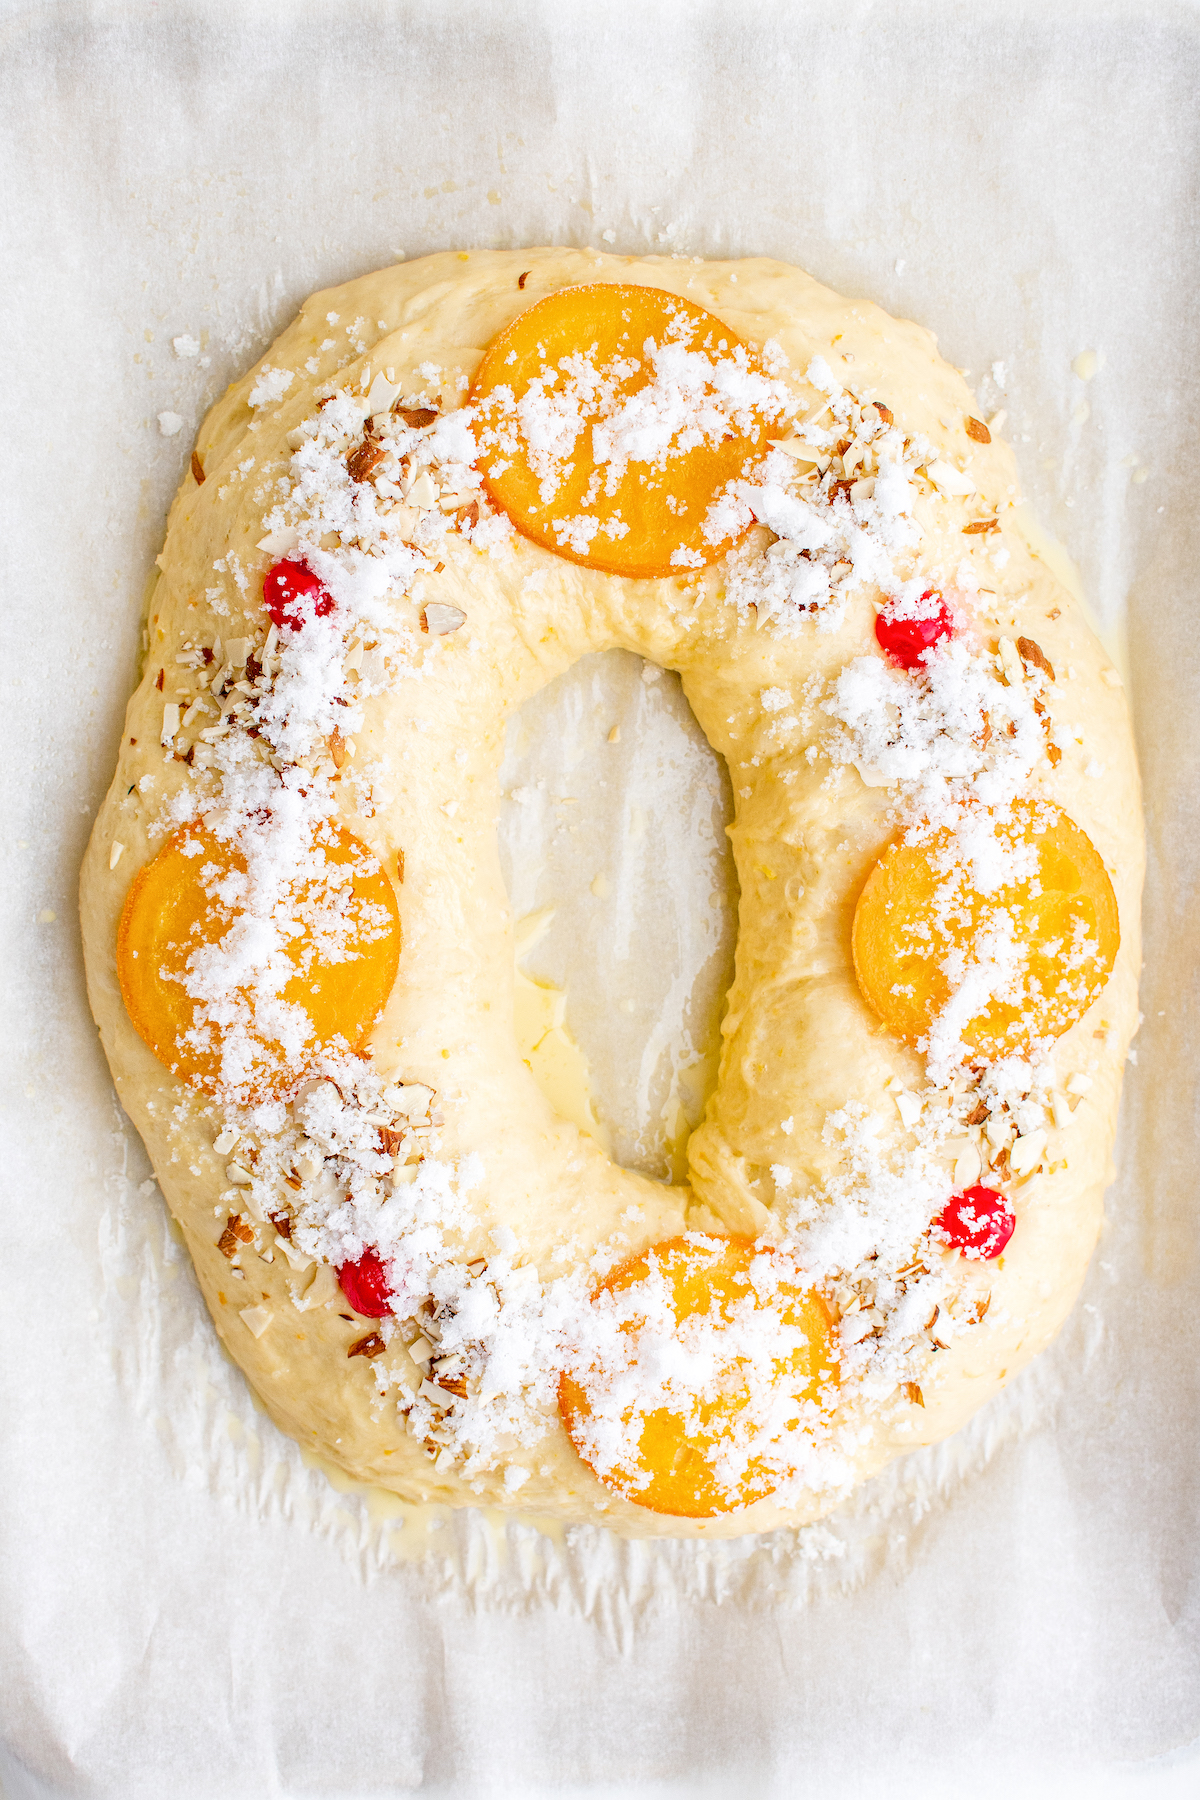 Decorating the roscón with candied oranges, cherries, and almonds. It's then sprinkled with the sugar mixture.